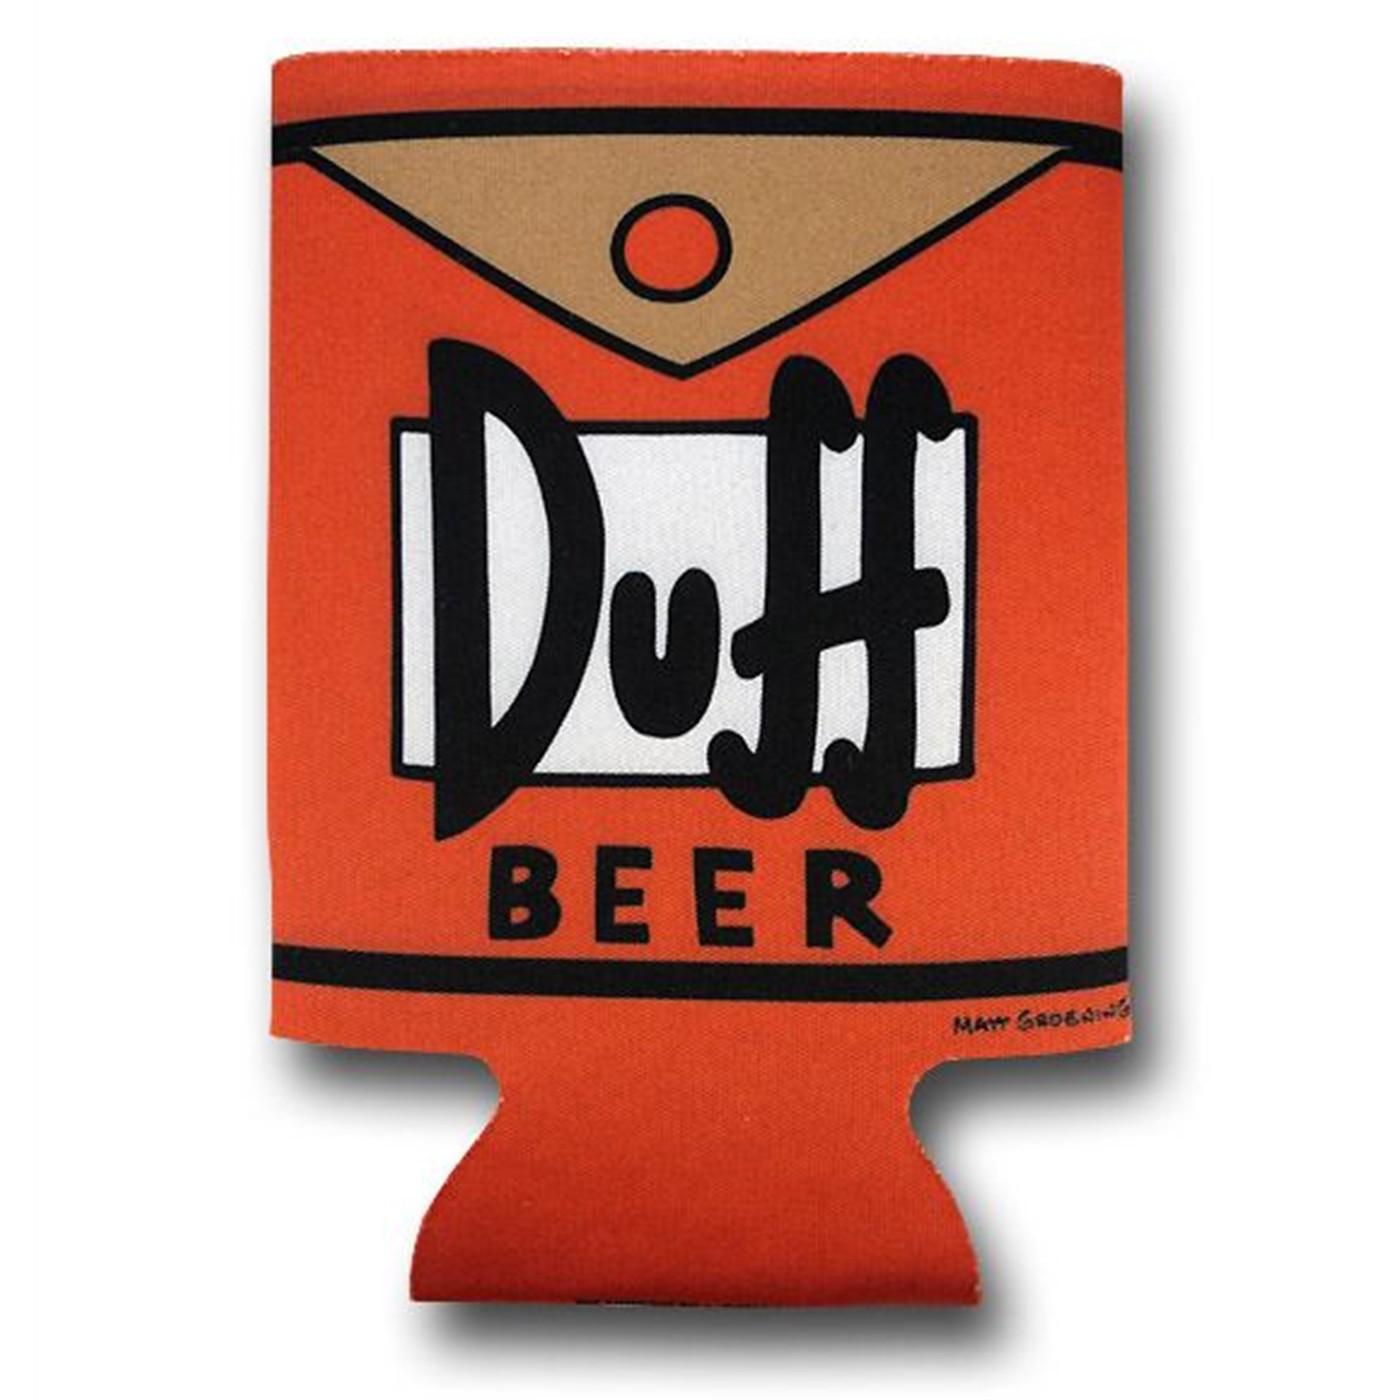 Simpsons Duff Beer Can and Bottle Cooler